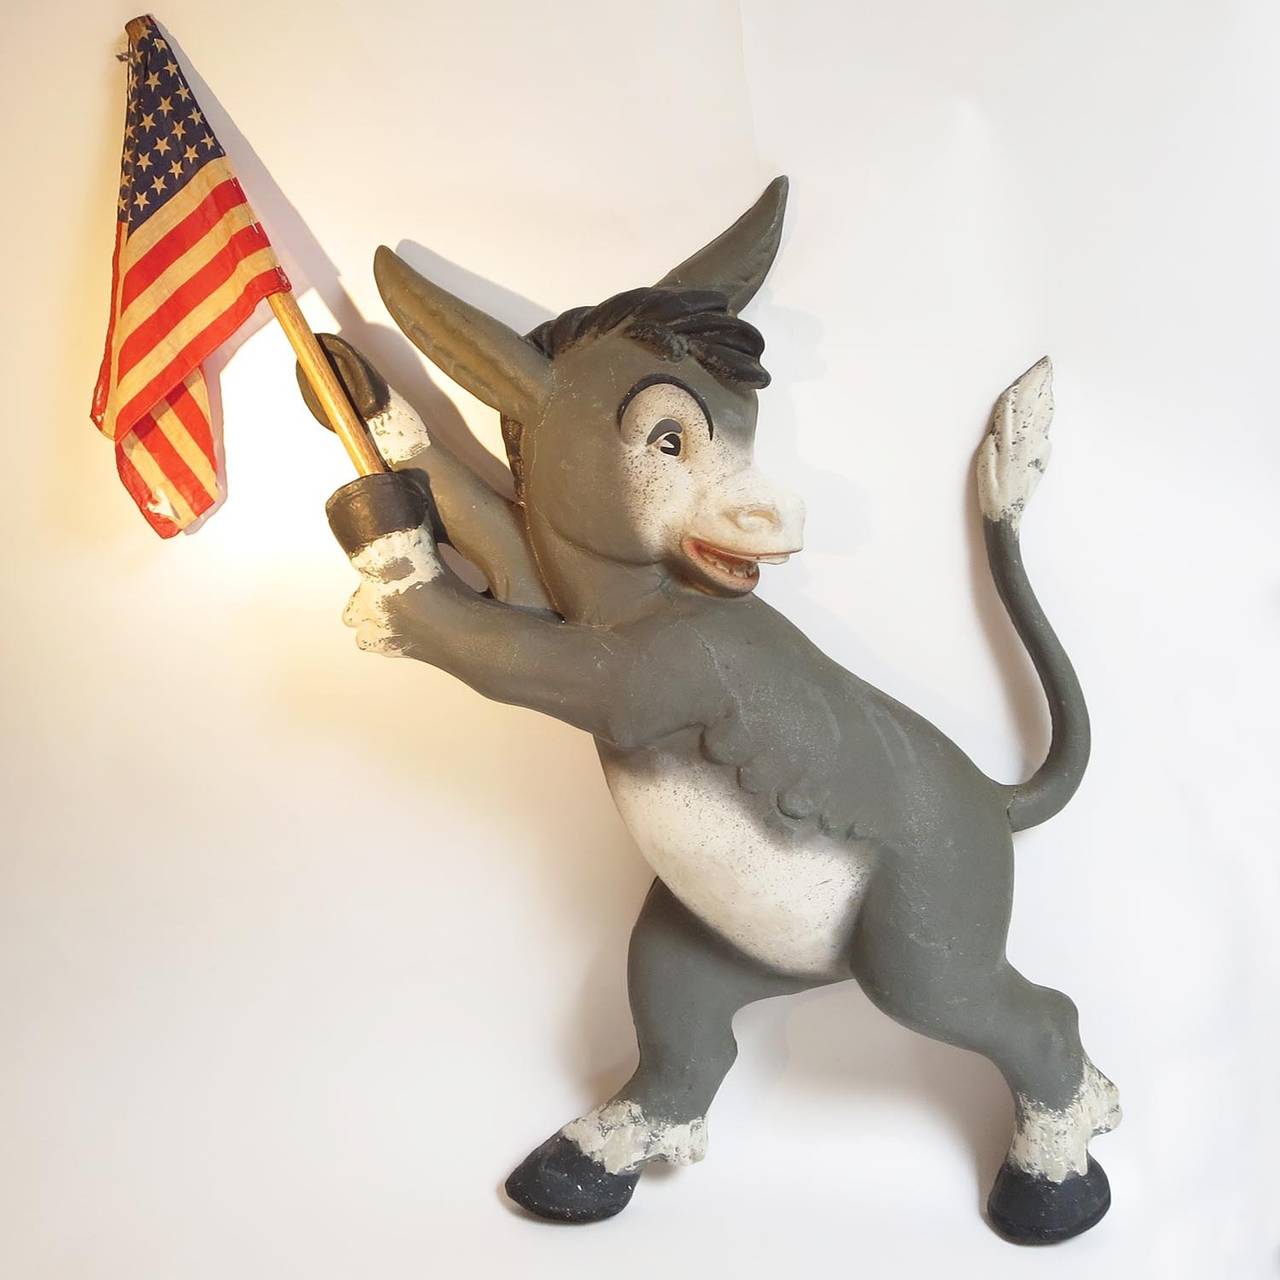 This charming pair of wall hangings each sport a 48 star flag, putting them into the 1950's or earlier. The donkey and elephant are both constructed of painted papier mache, and look fantastic! They could have been used in separate political